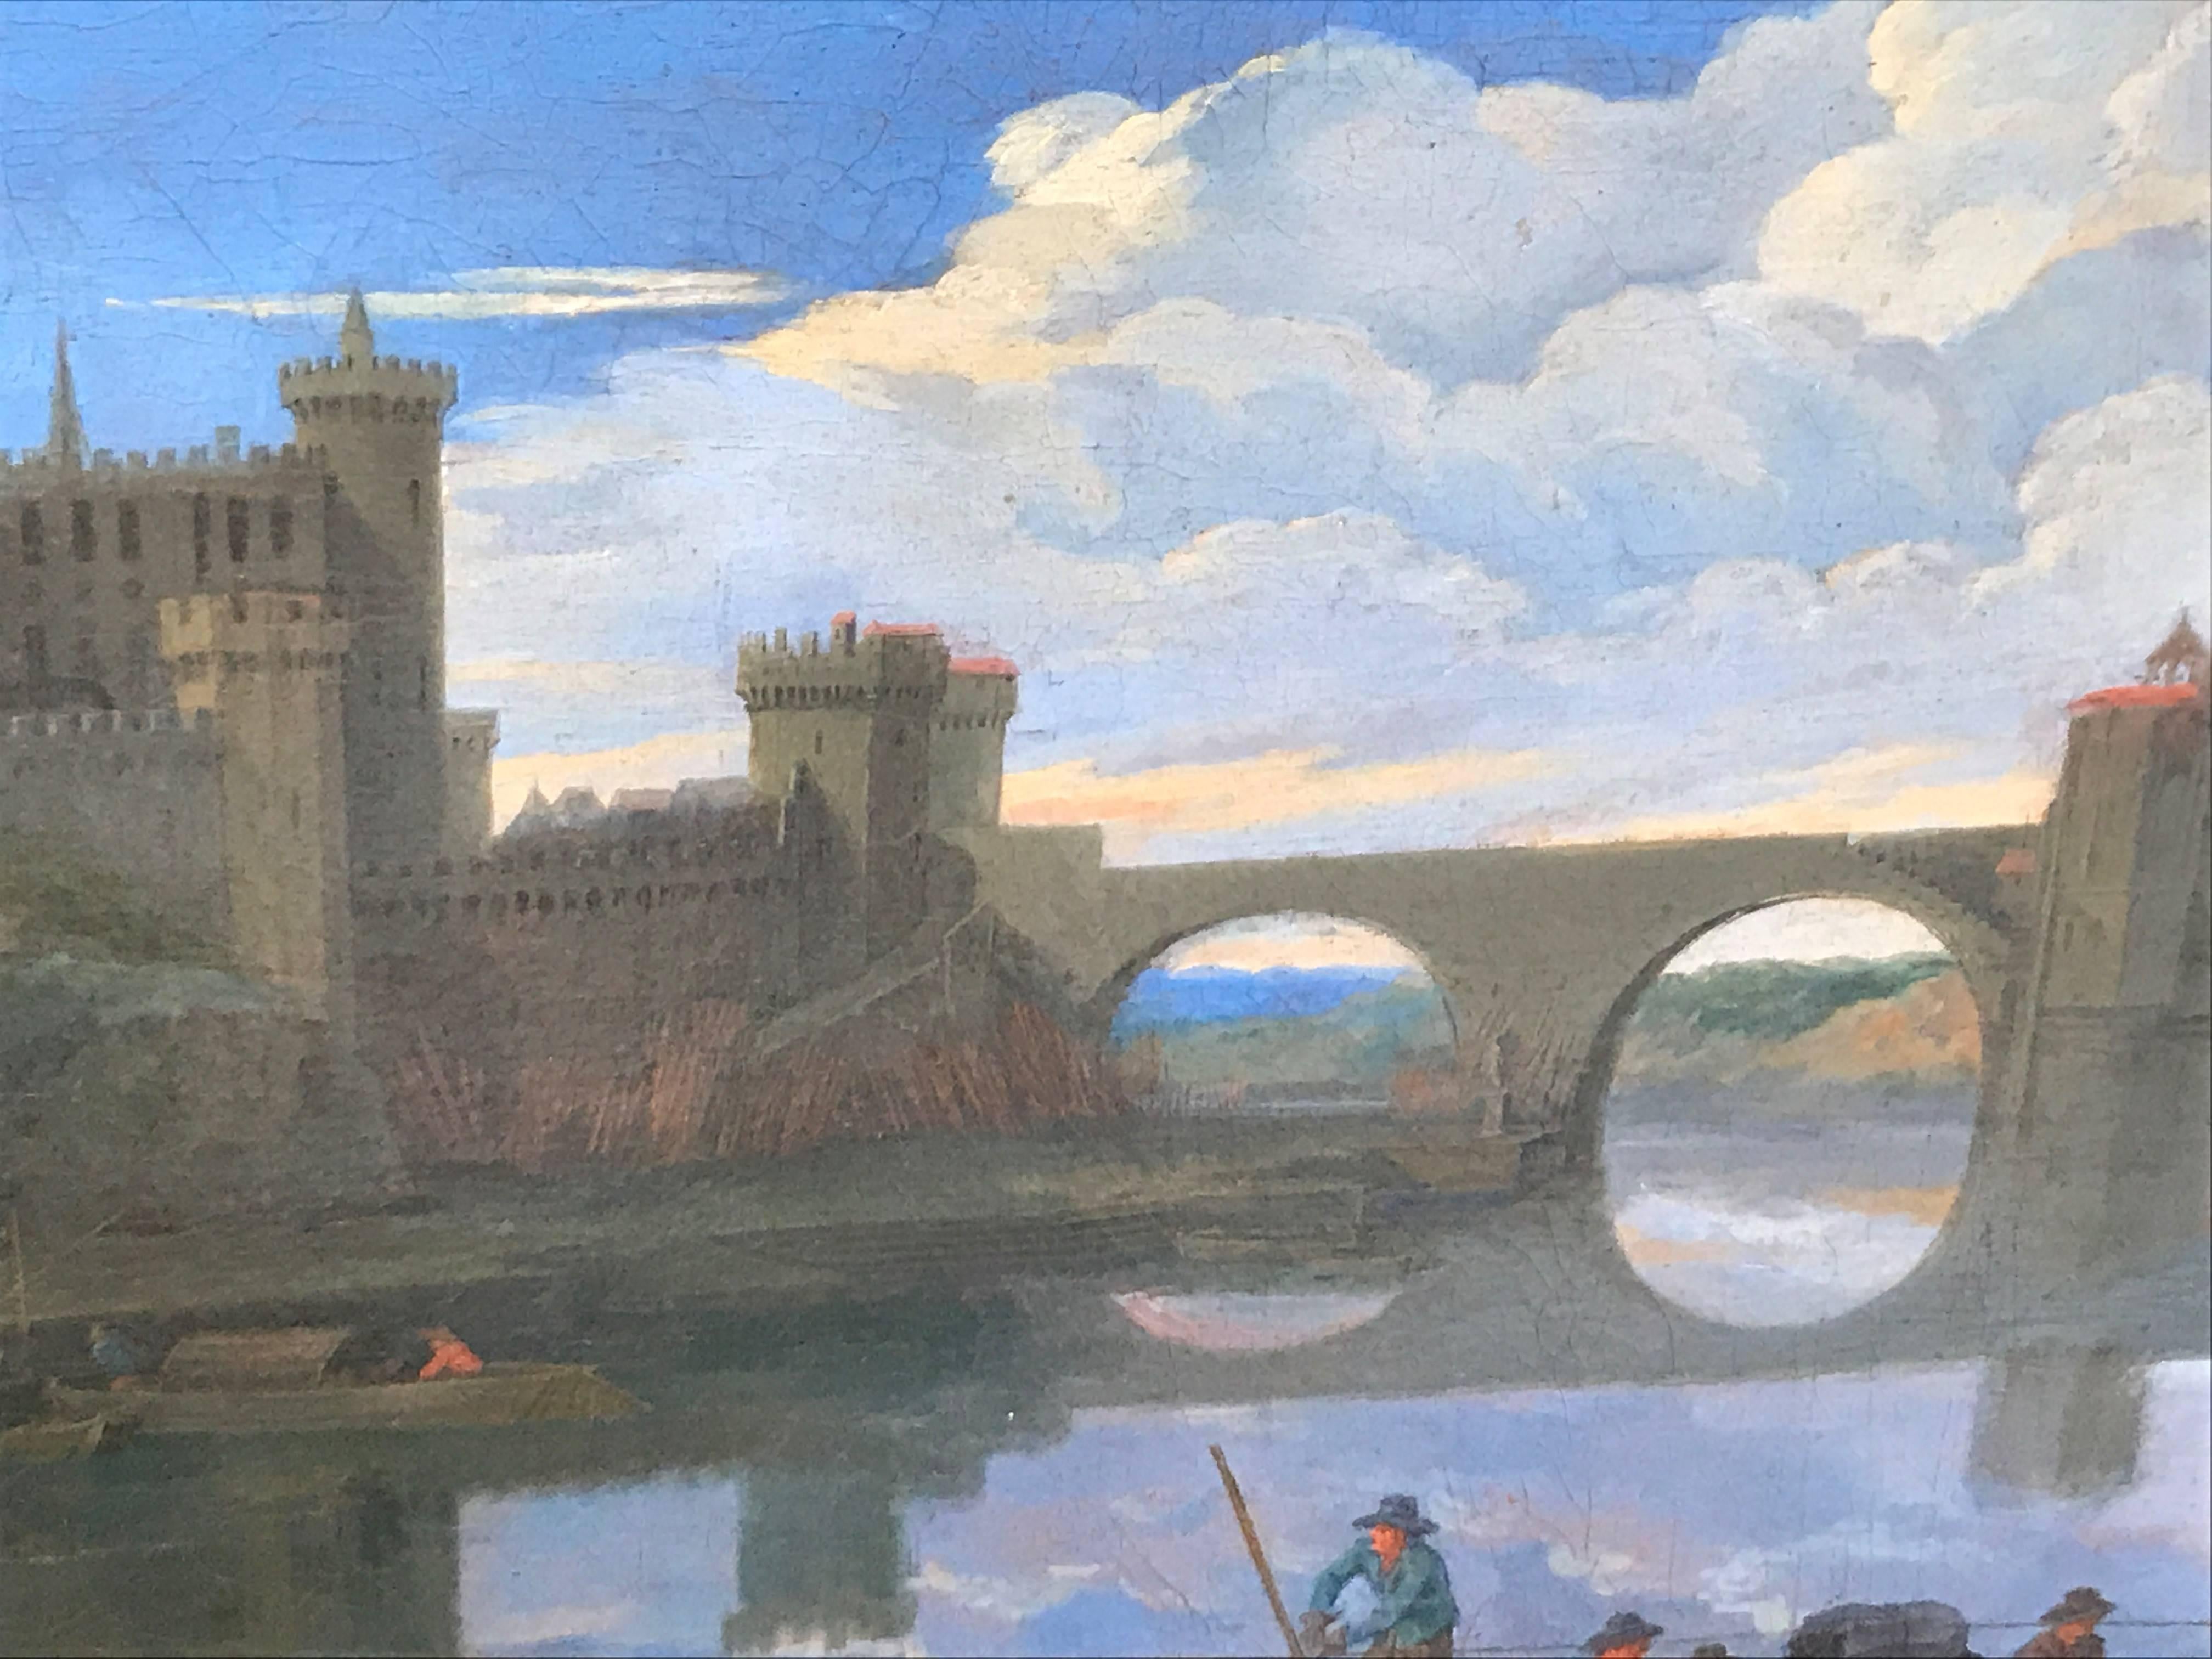 Provenance:
Sotheby’s December 5th 2006, Lot 388

Bout was a Flemish painter, draughtsman and etcher. He is known mainly for his landscapes, city, coast and country views and architectural scenes painted in a style reminiscent of earlier Flemish